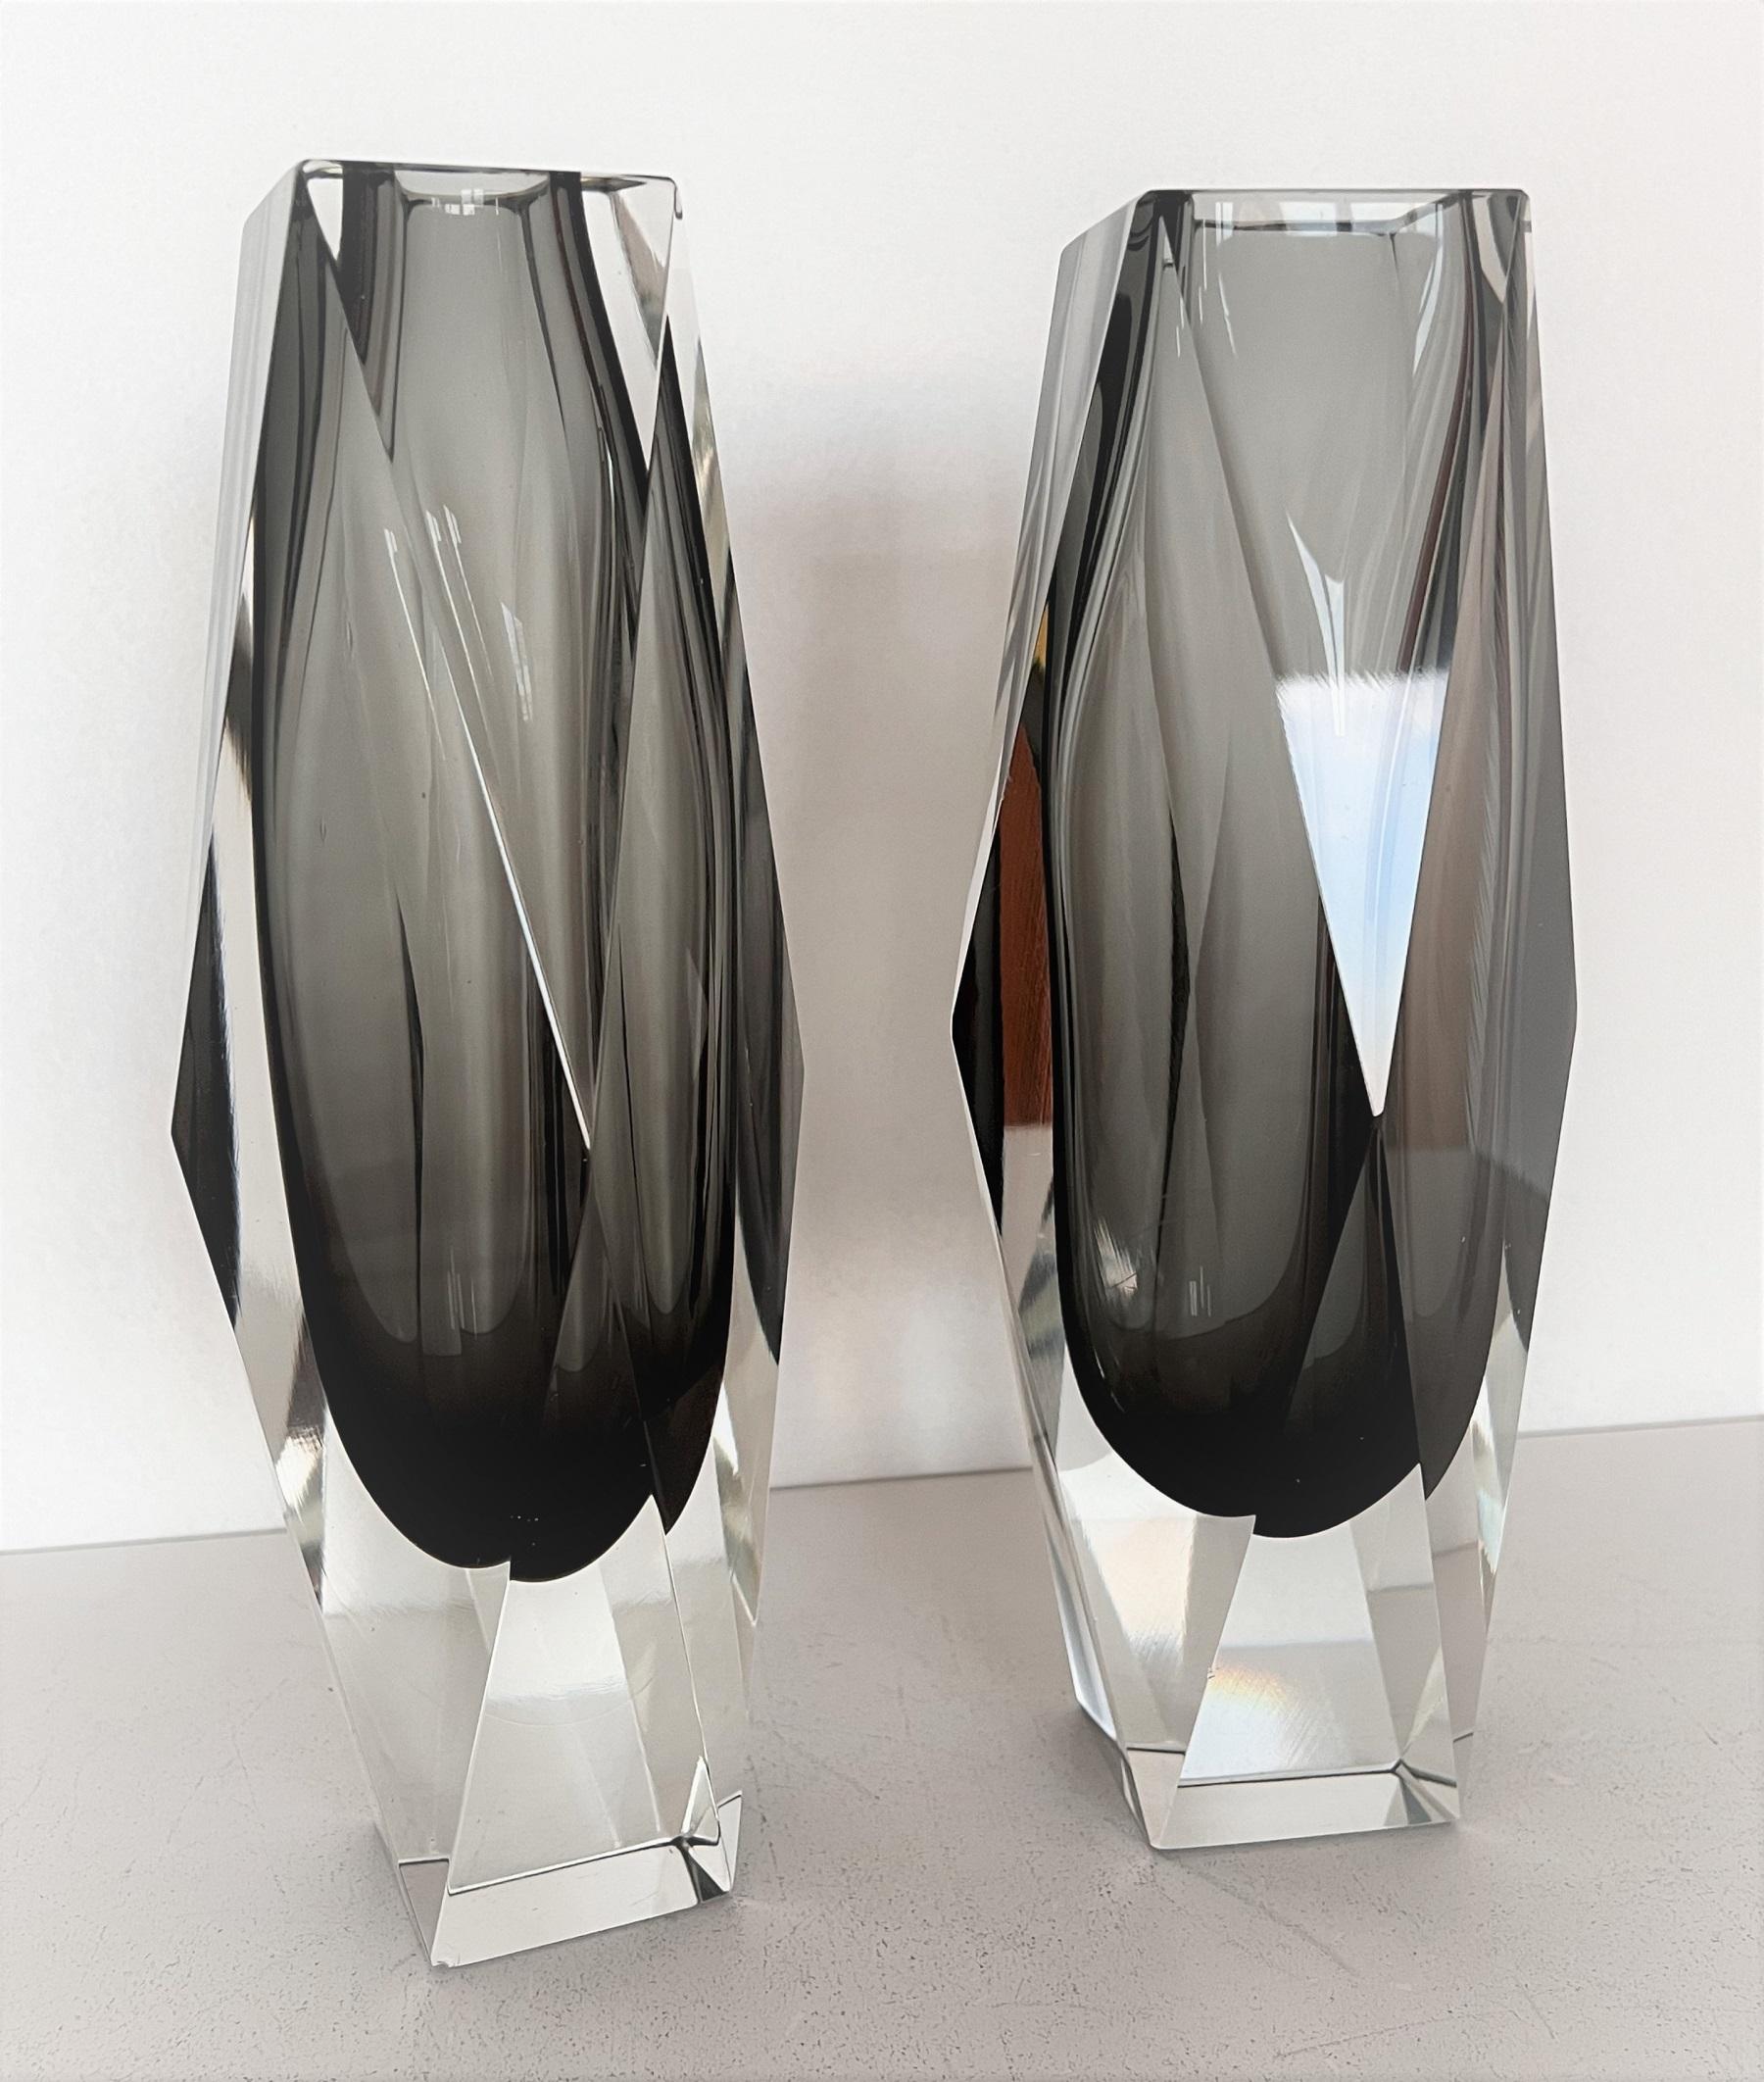 Hand-Crafted Italian Mid-Century Murano Crystal Vase Set of 2 in Grey by Flavio Poli, 1970s For Sale